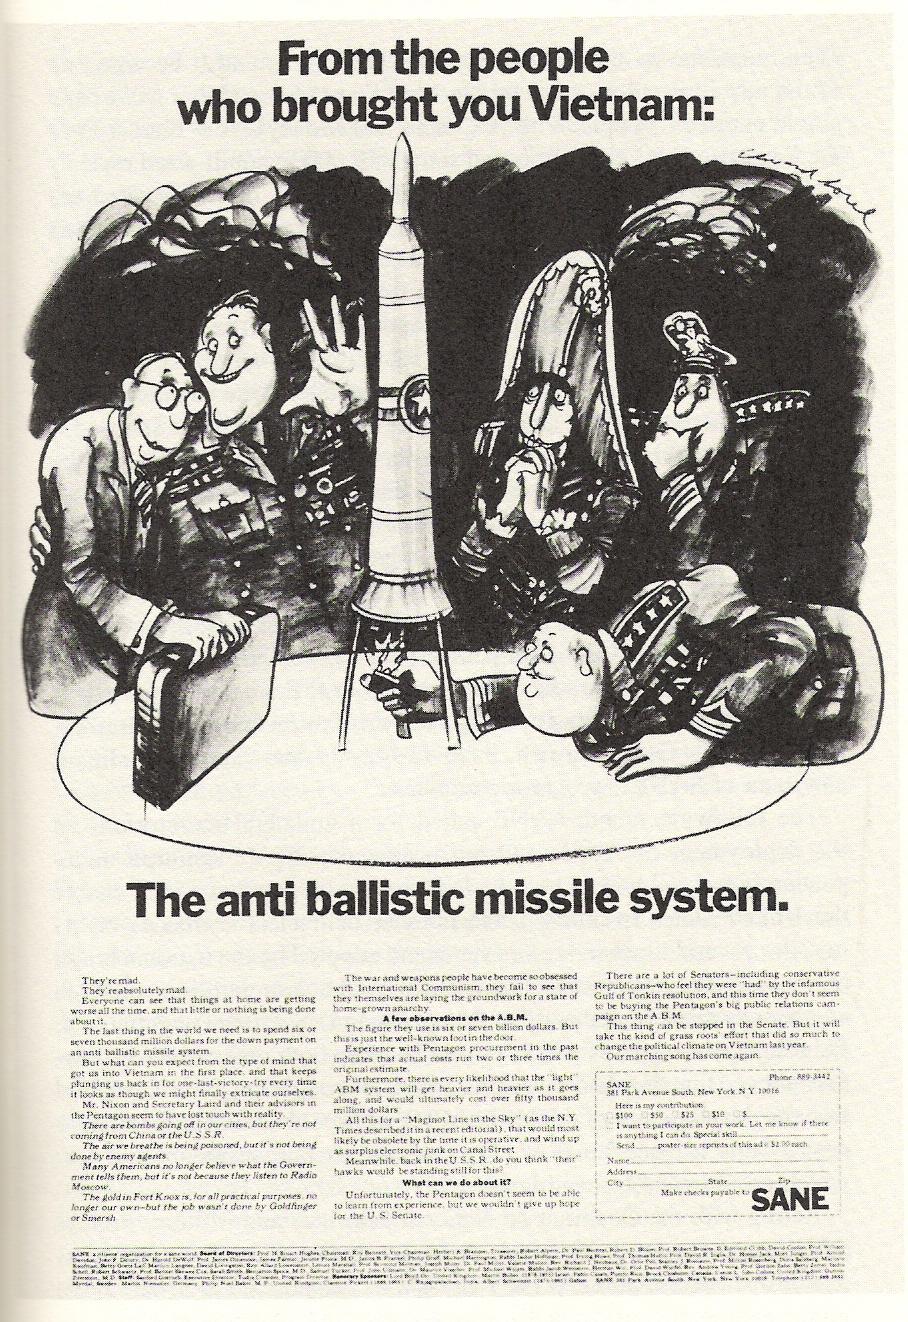 Figure 34 A 1969 New York Times advertisement paid for by the Society for a SANE Nuclear Policy illustrates how